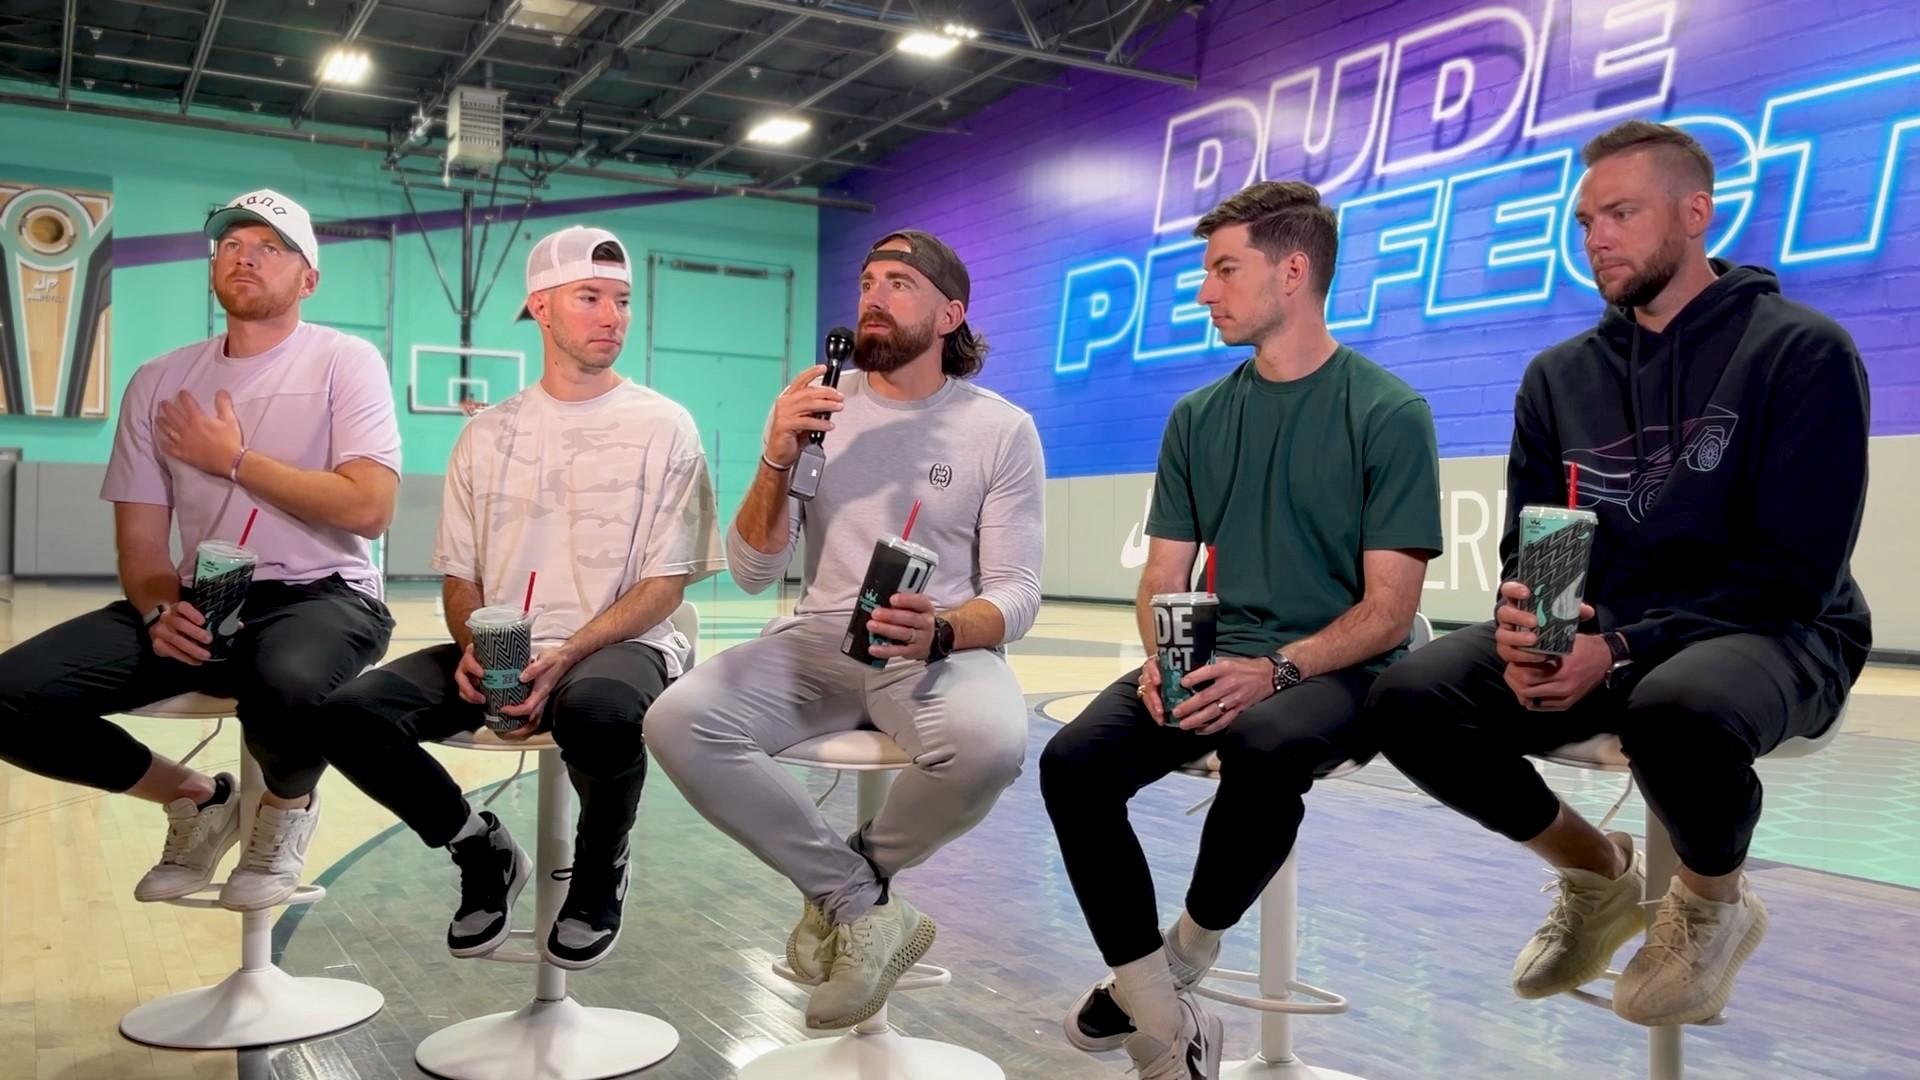 As Dude Perfect's fame continues to grow, so does their approach to making content. And soon, the group is hoping to allow the younger generation to give it a shot.